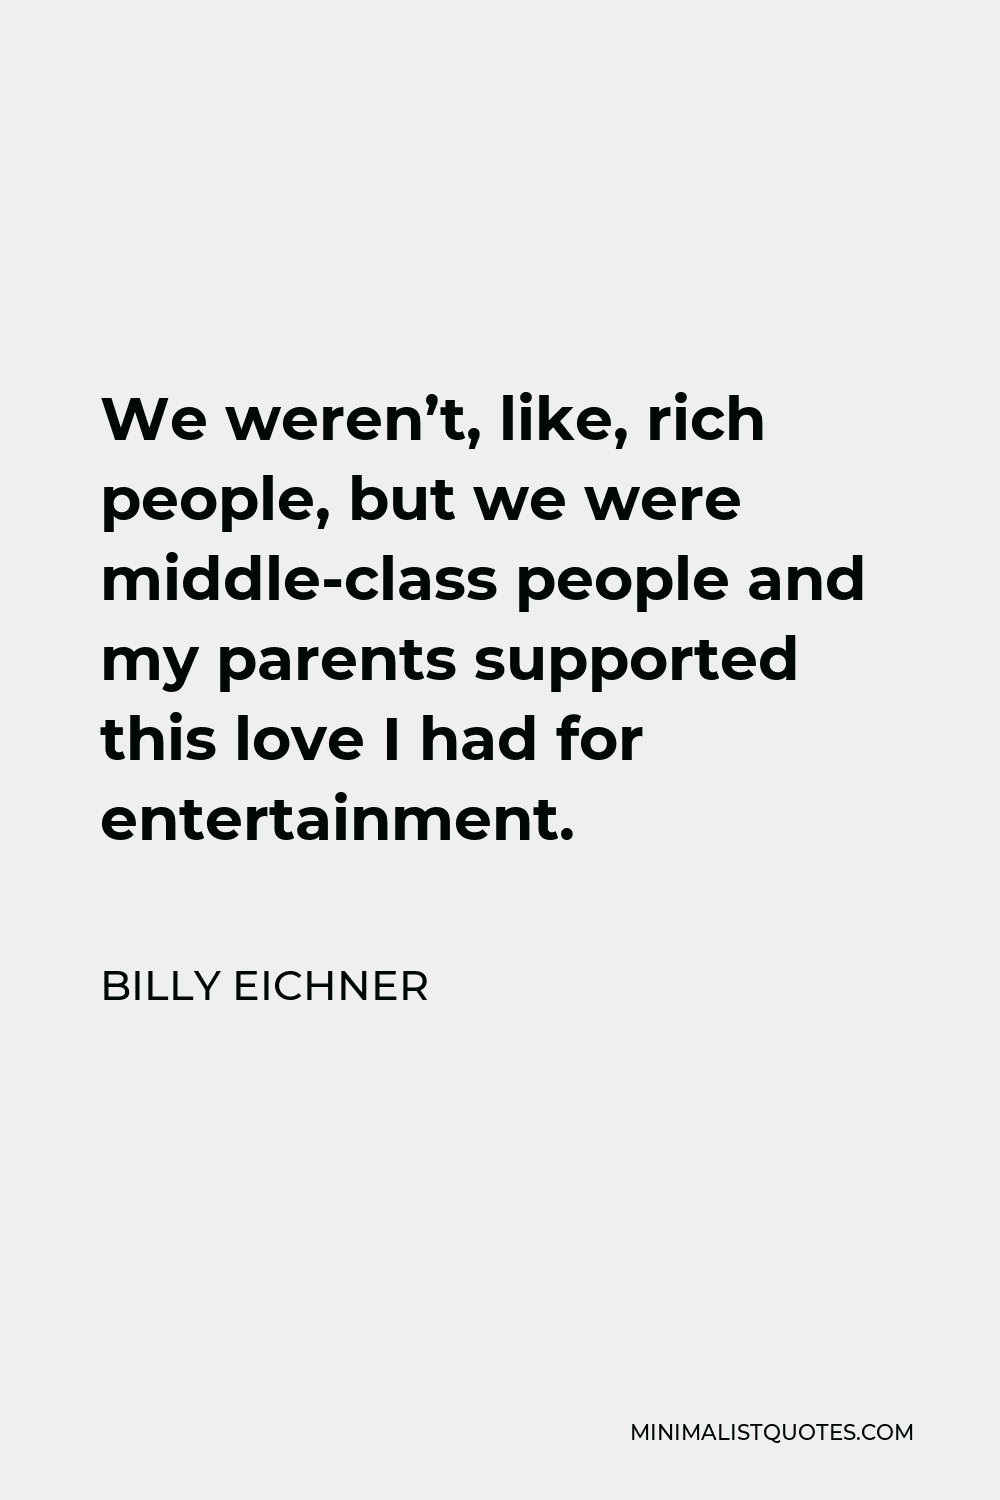 Billy Eichner Quote - We weren’t, like, rich people, but we were middle-class people and my parents supported this love I had for entertainment.